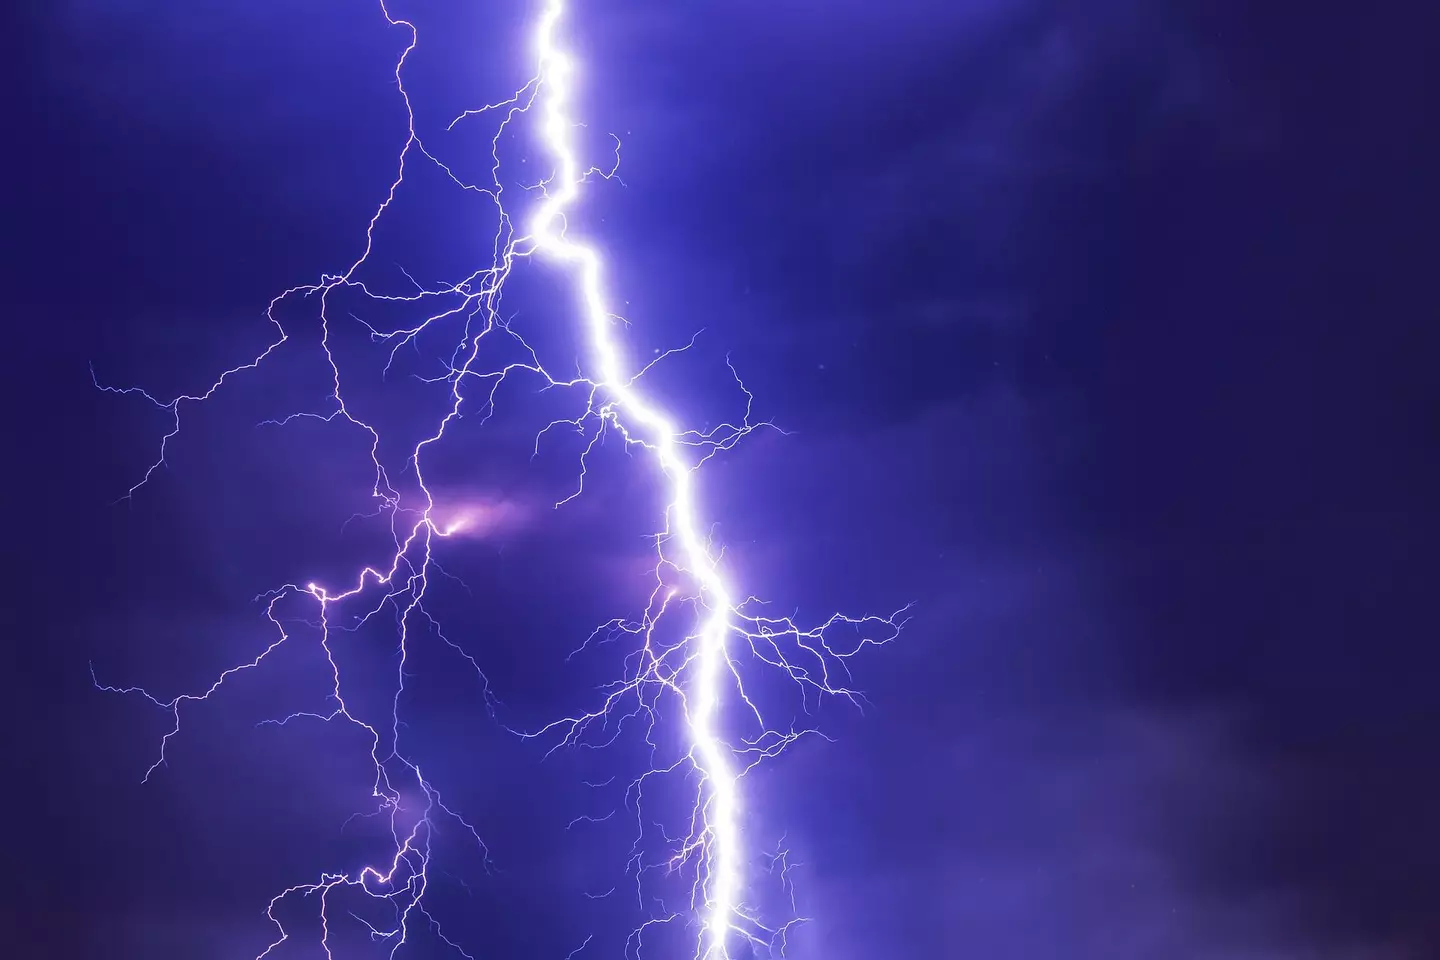 While lightning strikes are incredibly rare, they can prove deadly when they do happen.